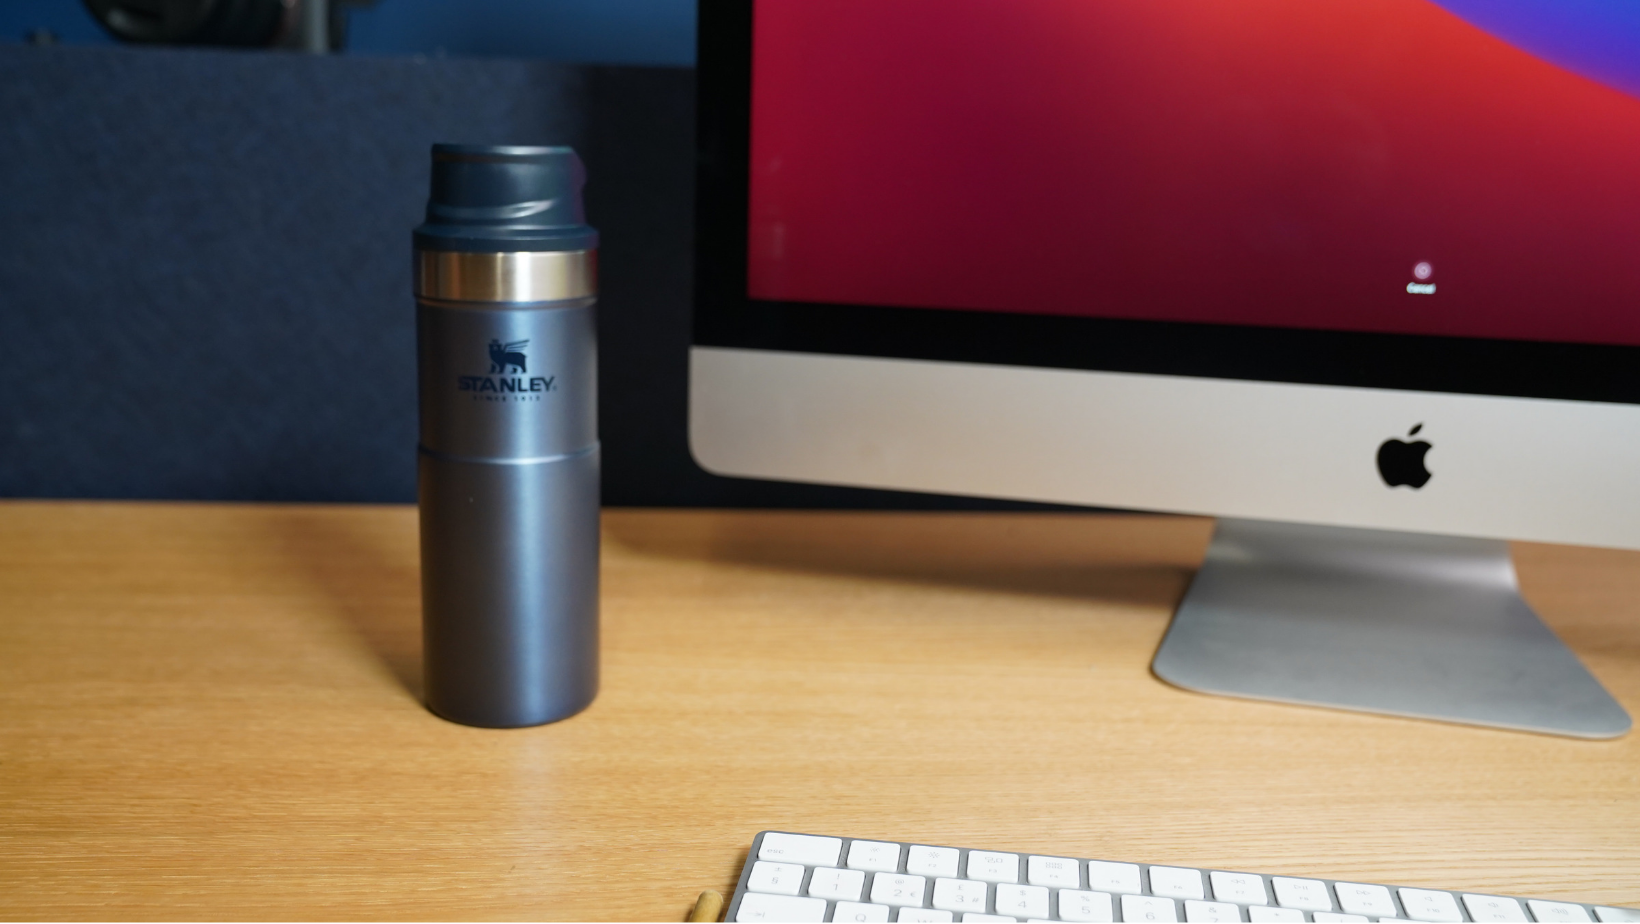 Stanley Classic Trigger Action Travel Mug Review - Brad's Backpack